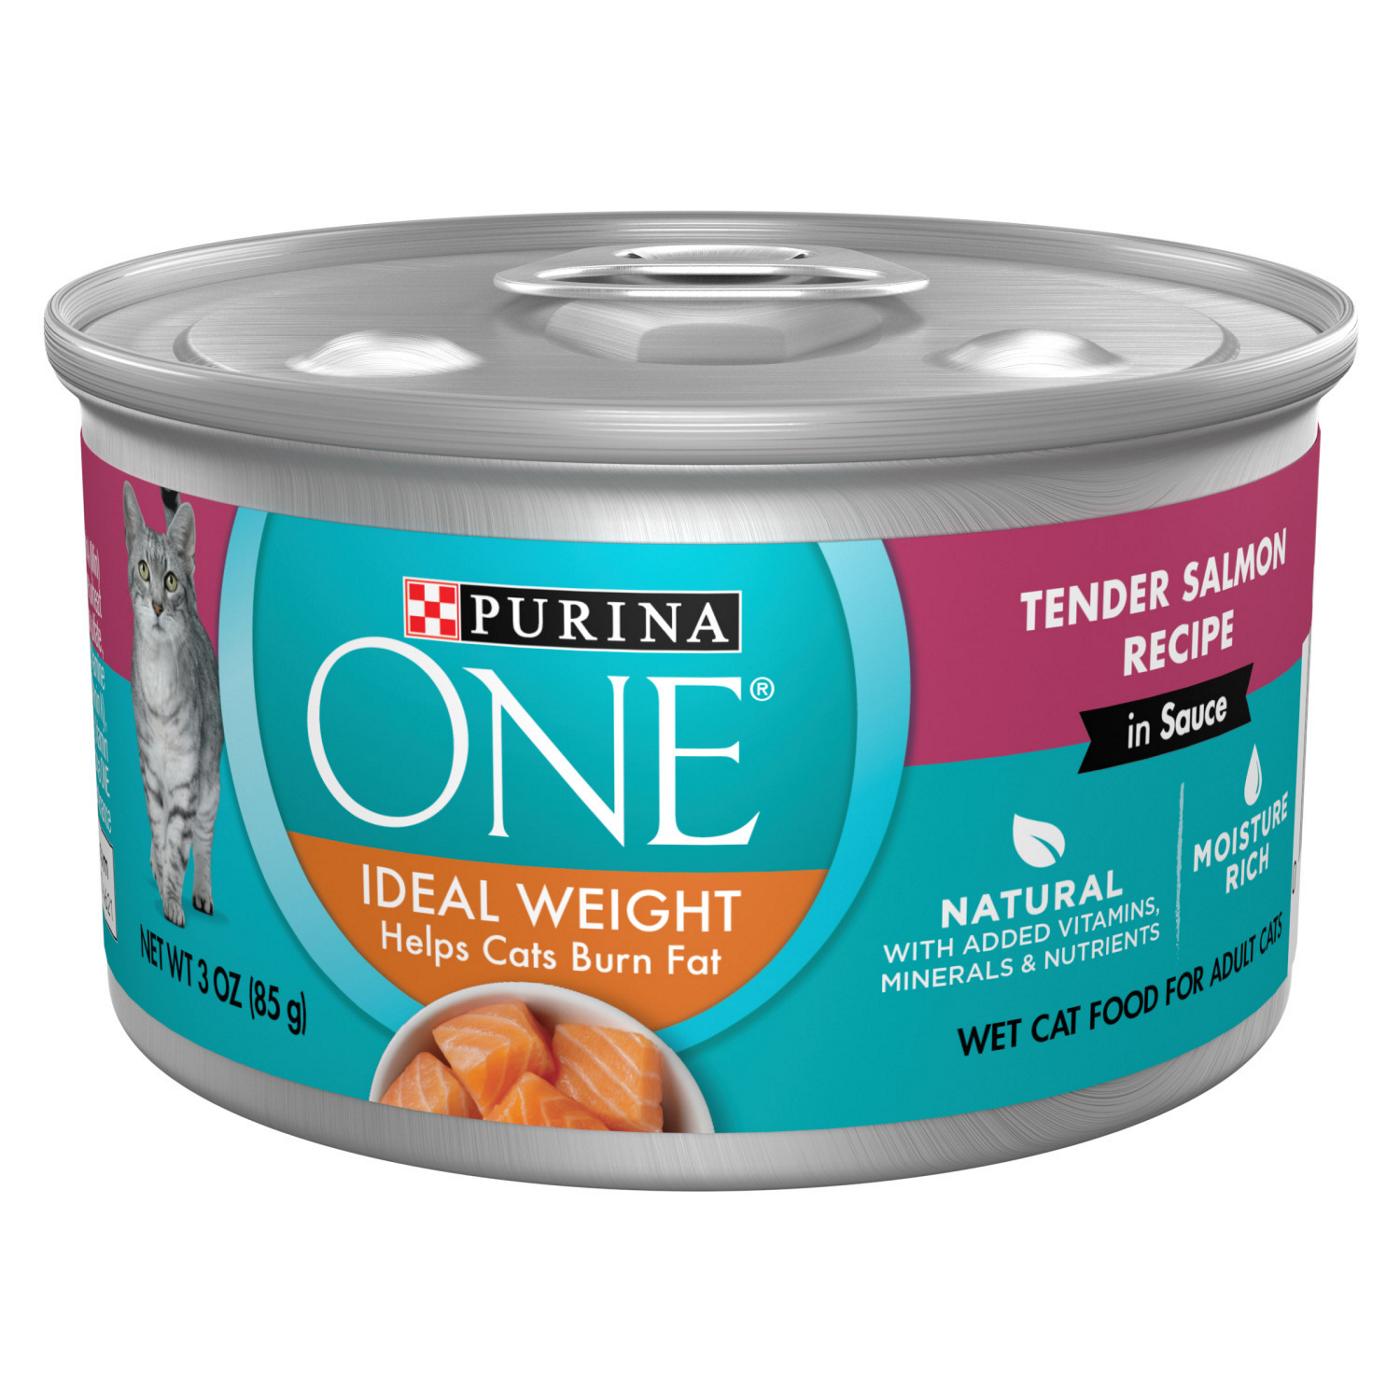 Purina ONE Ideal Weight Tender Salmon Wet Cat Food; image 1 of 6